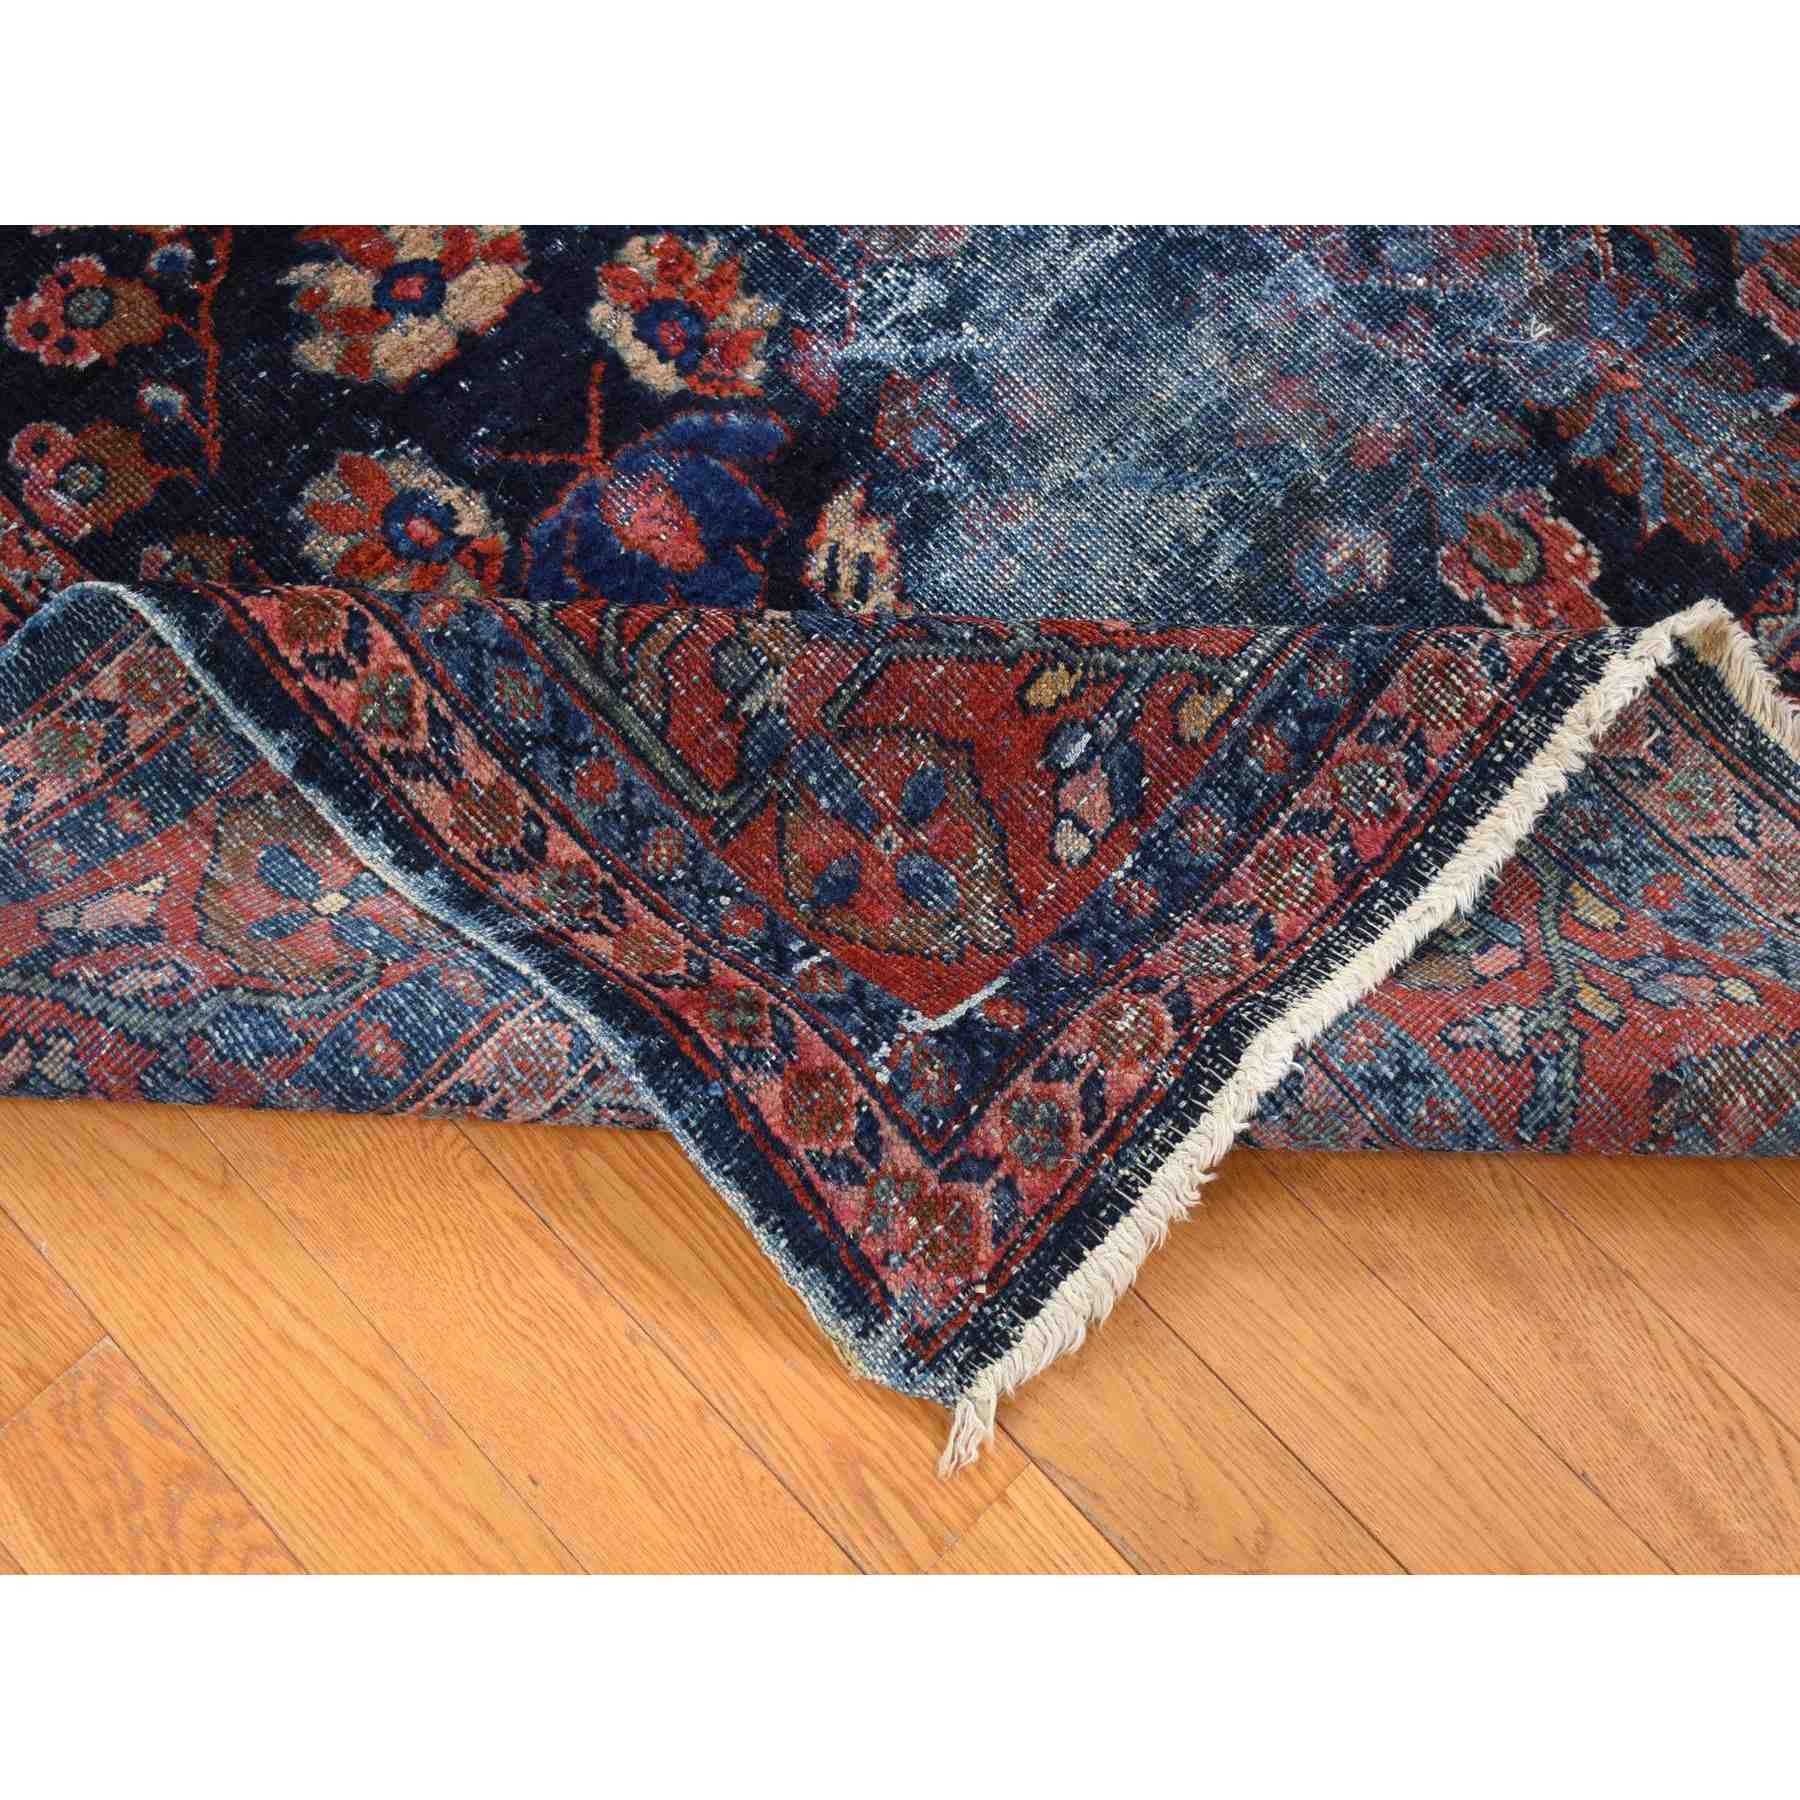 Antique-Hand-Knotted-Rug-402655